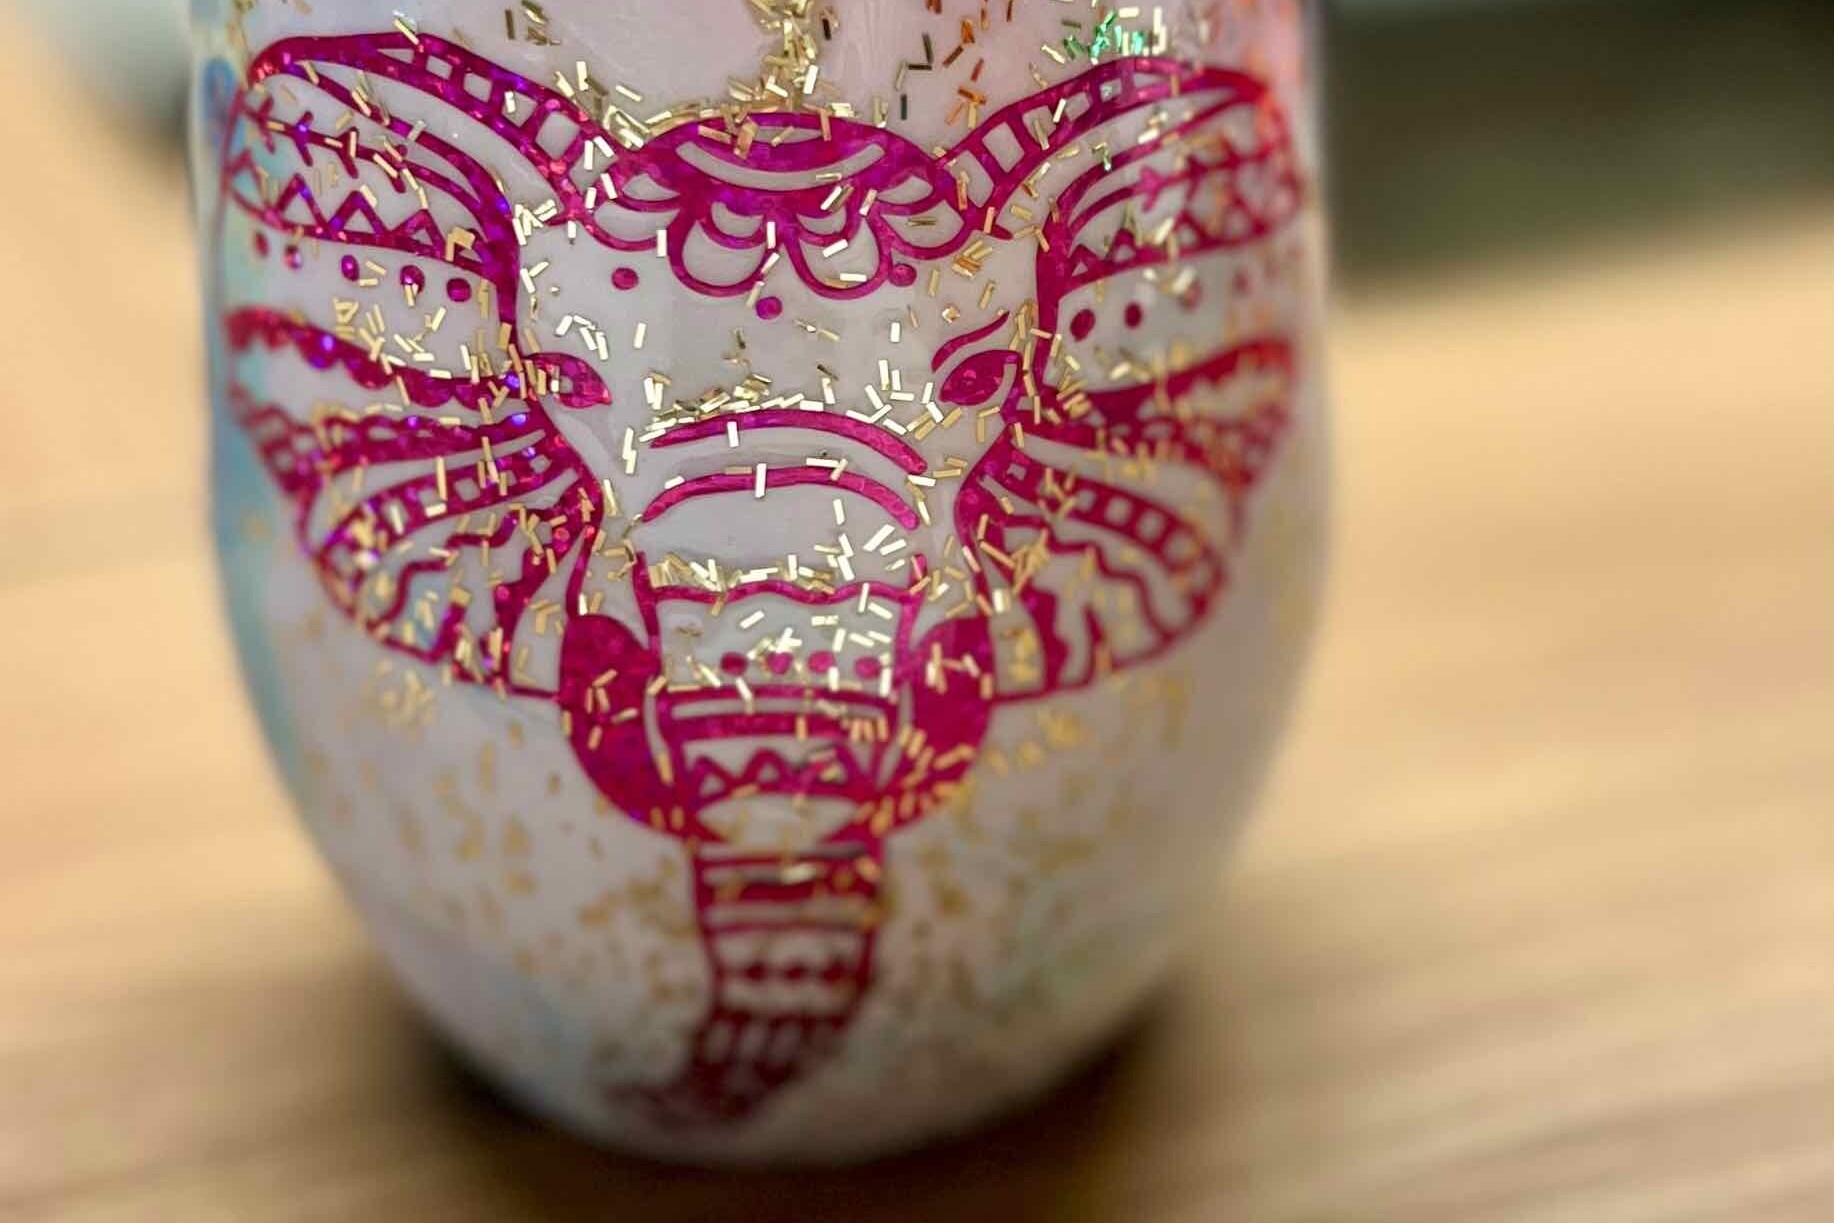 cup designed with a bright pink elephant with gold glitter